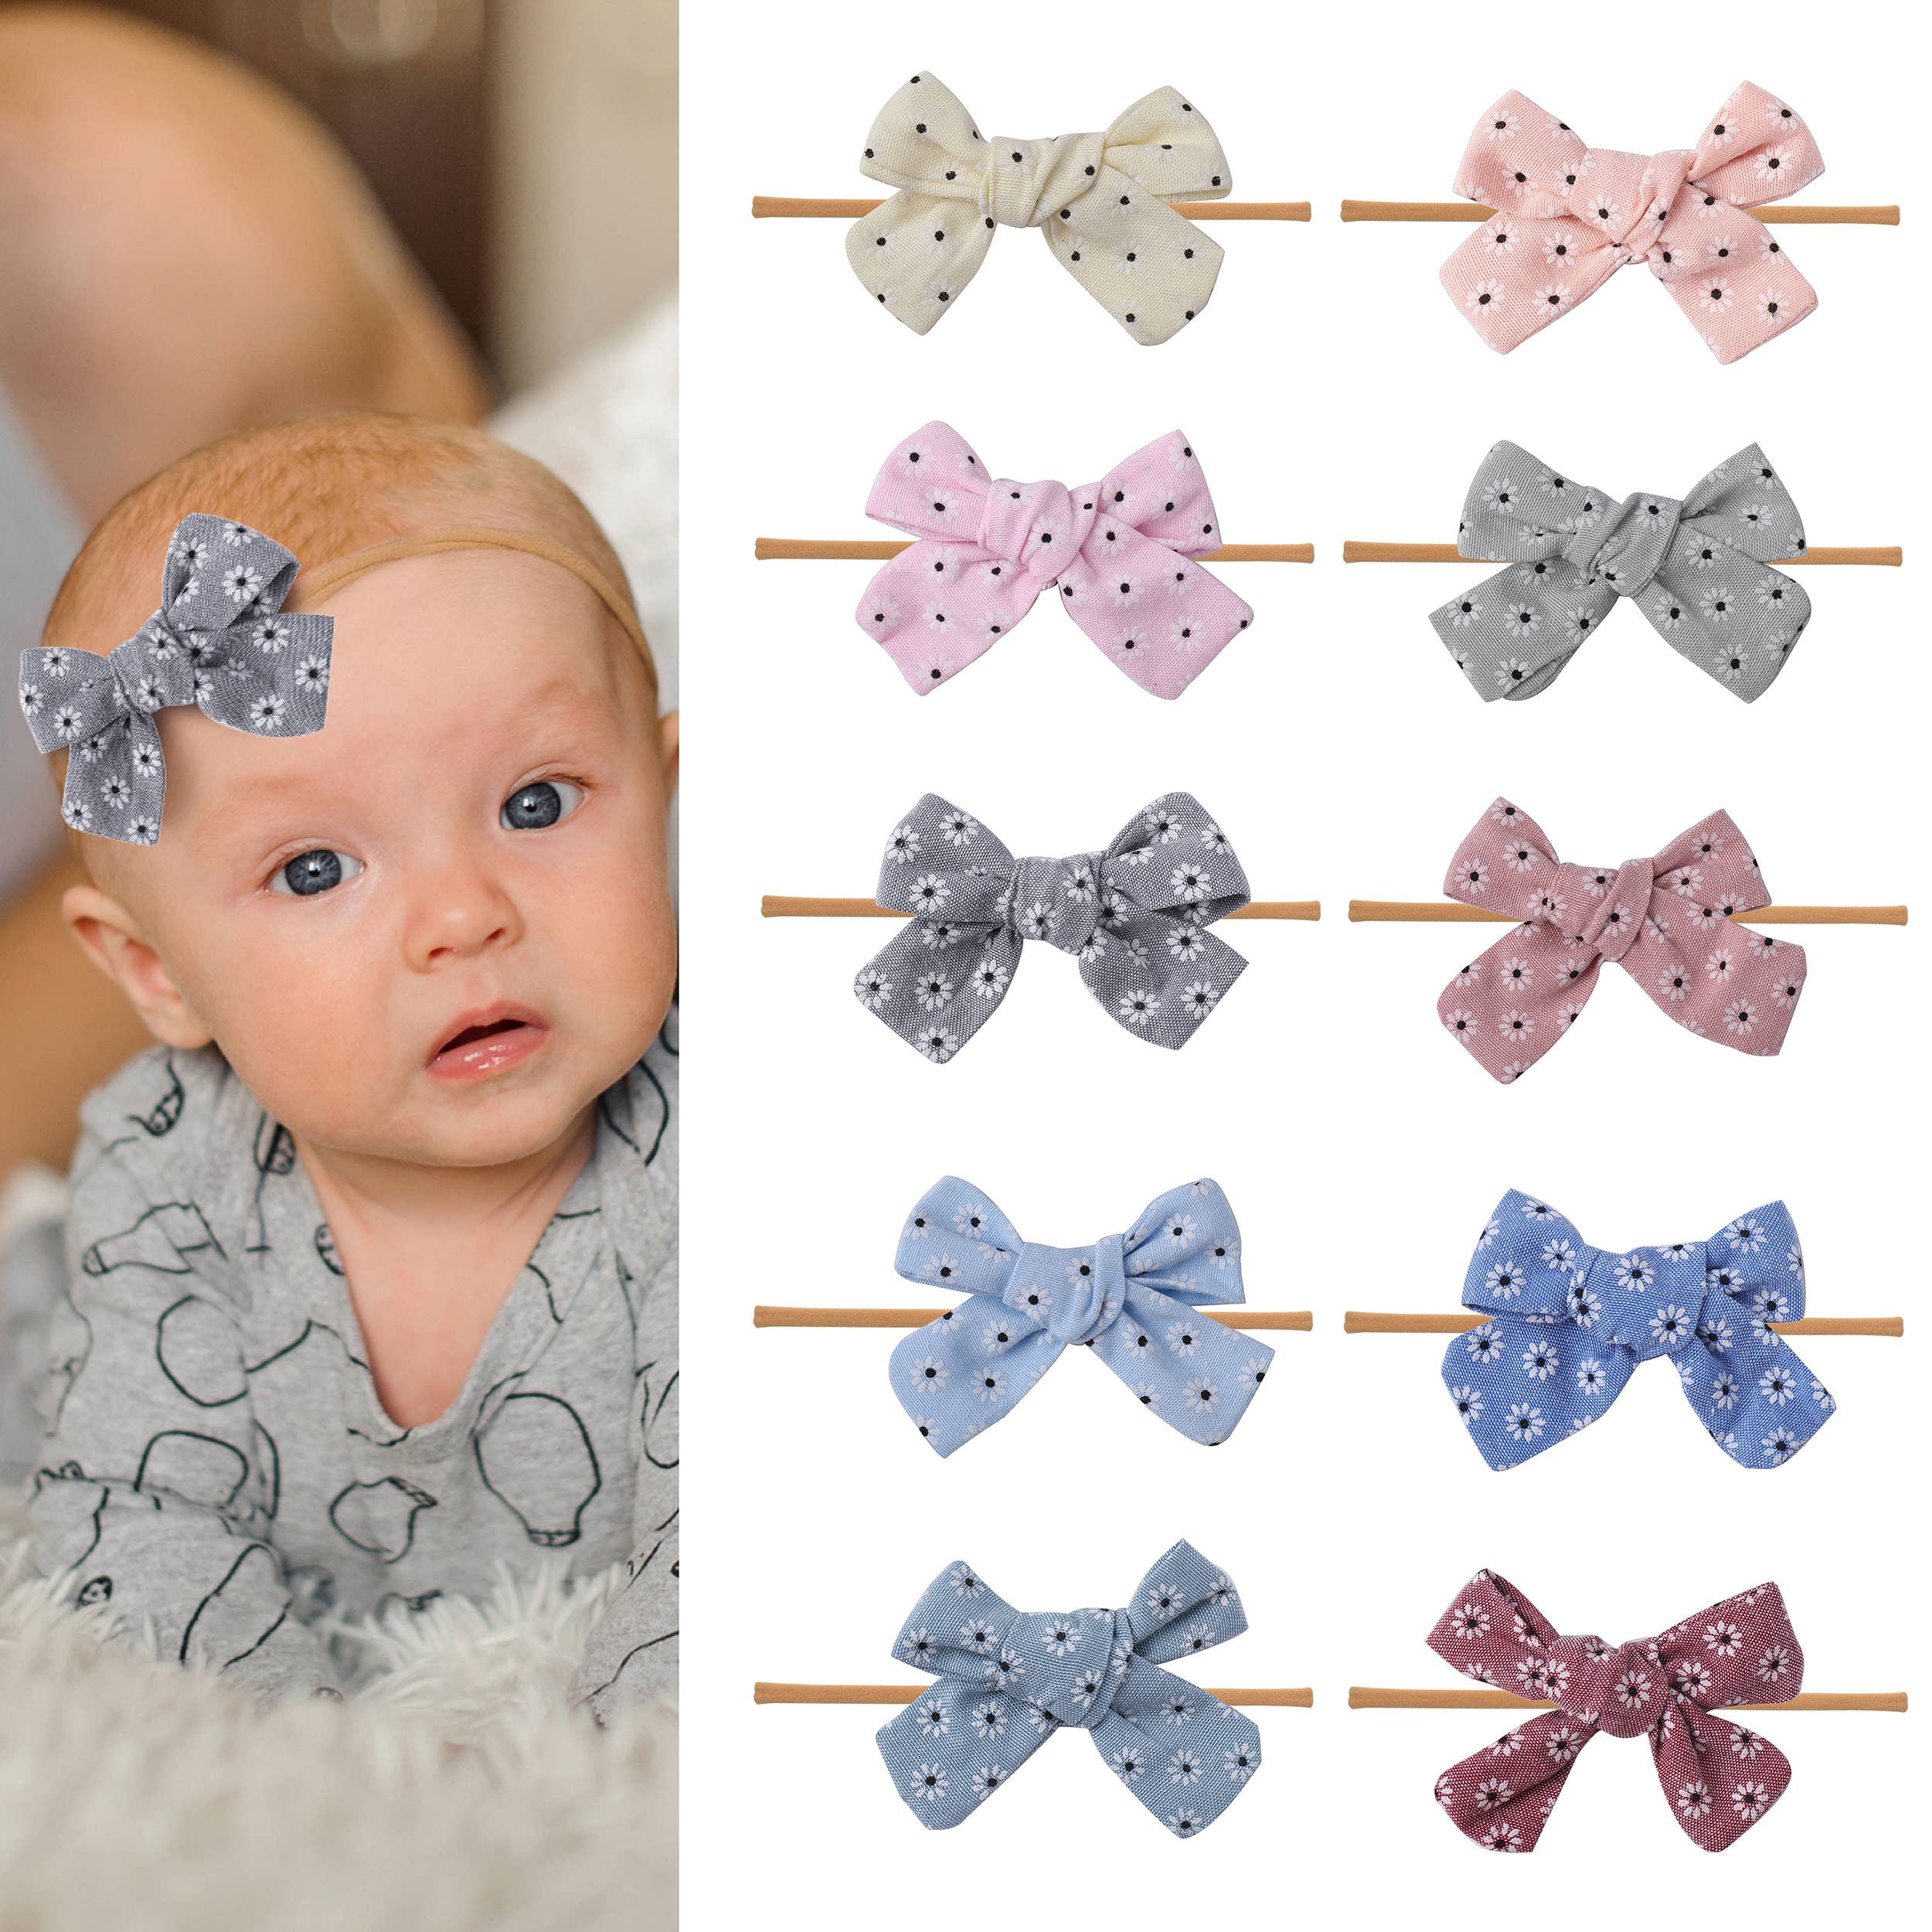 Linen Bow infant headband neutral color Hair bows rhinestone bow little girl toddler infant beautiful spring bows Linen headband